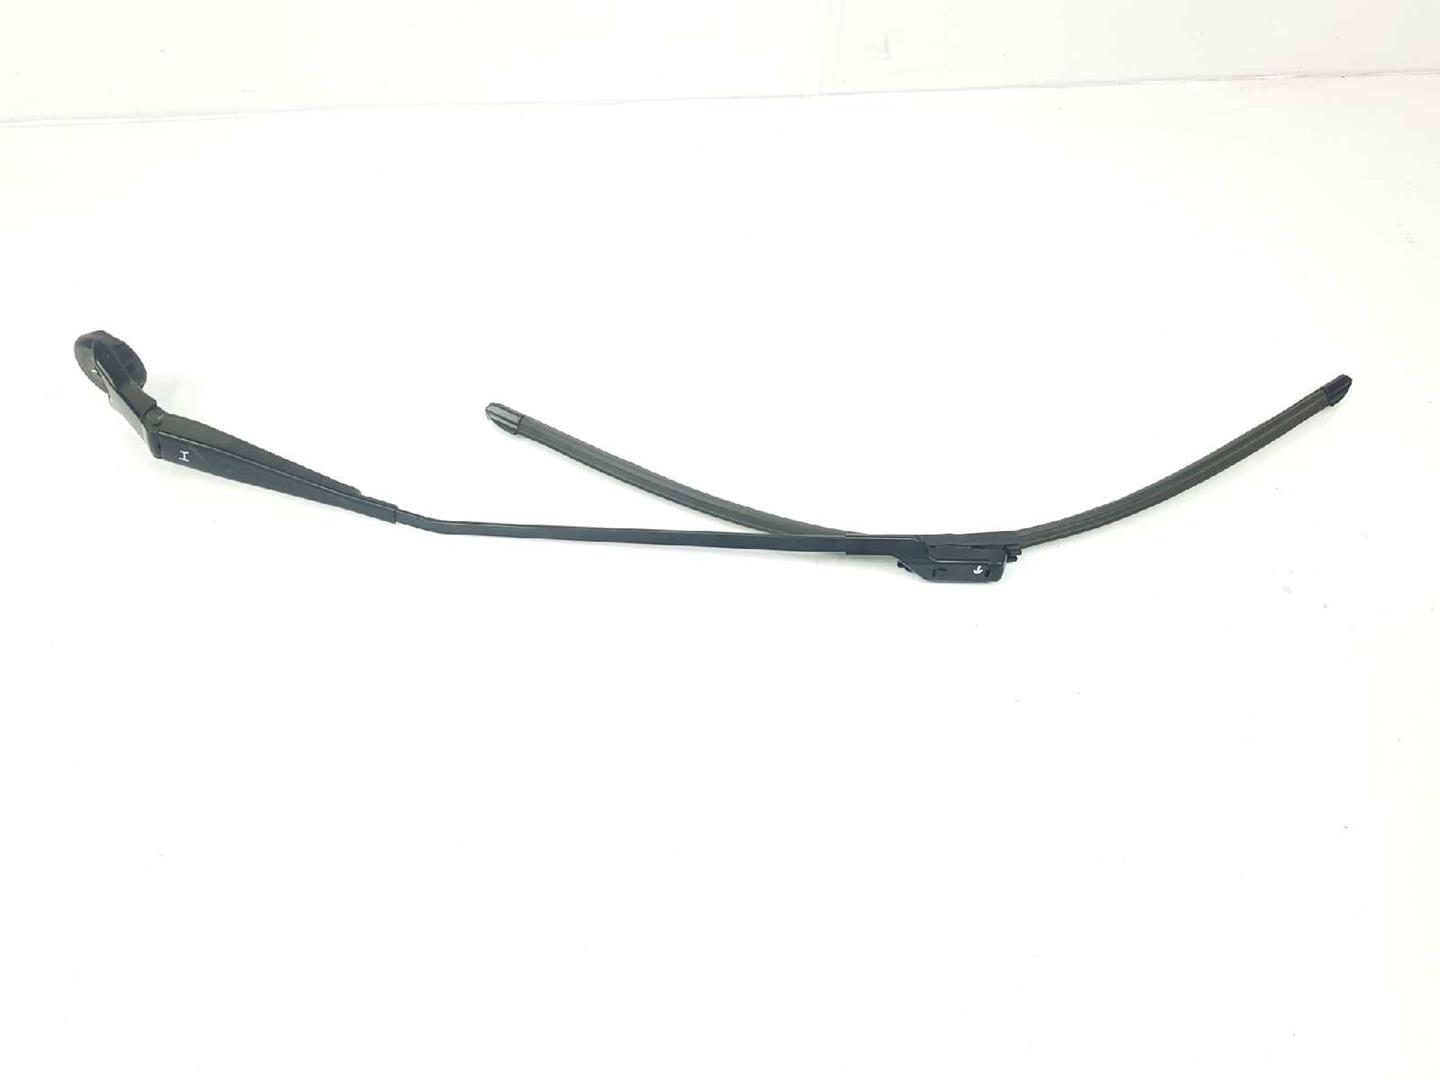 CITROËN C4 Picasso 2 generation (2013-2018) Front Wiper Arms 9676370680, 1609428680 19714211